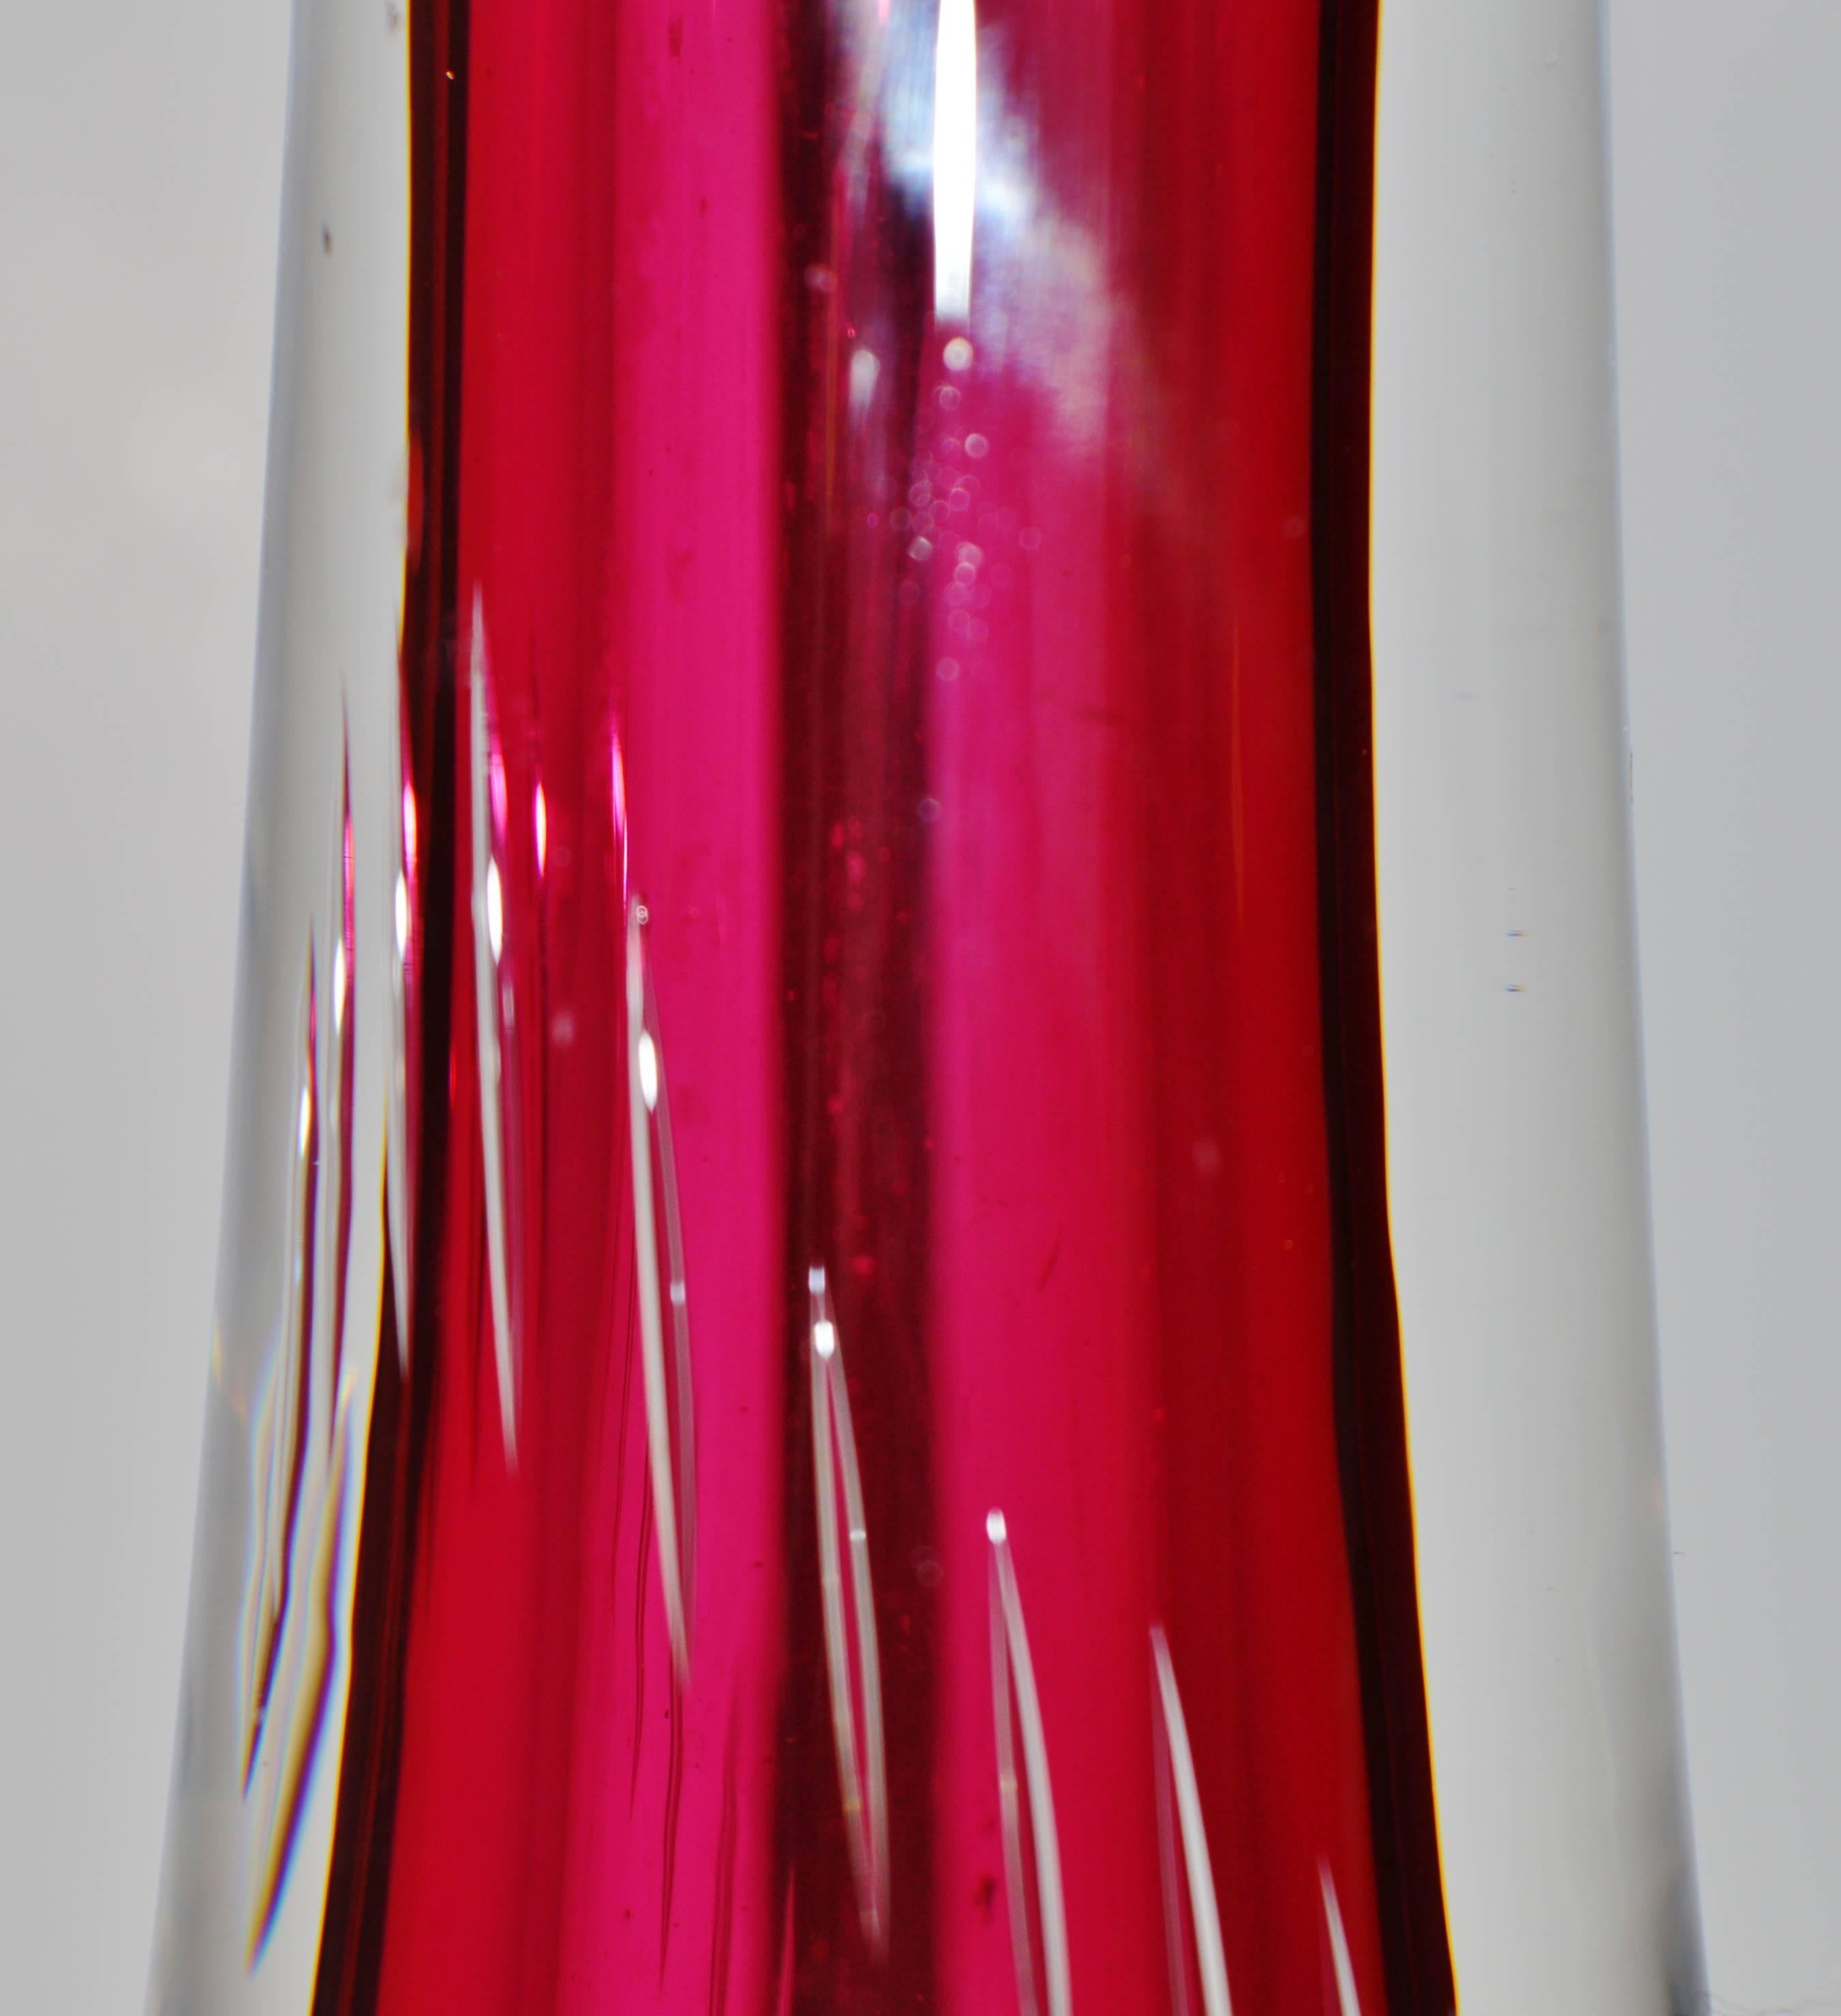 This lovely Kosta Boda vase in cranberry and clear features the controlled bubble, but the vase was elongated after the bubbles were inserted, such that the bubbles in the middle are elongated. Angled mouth and in excellent condition. Signed Kosta